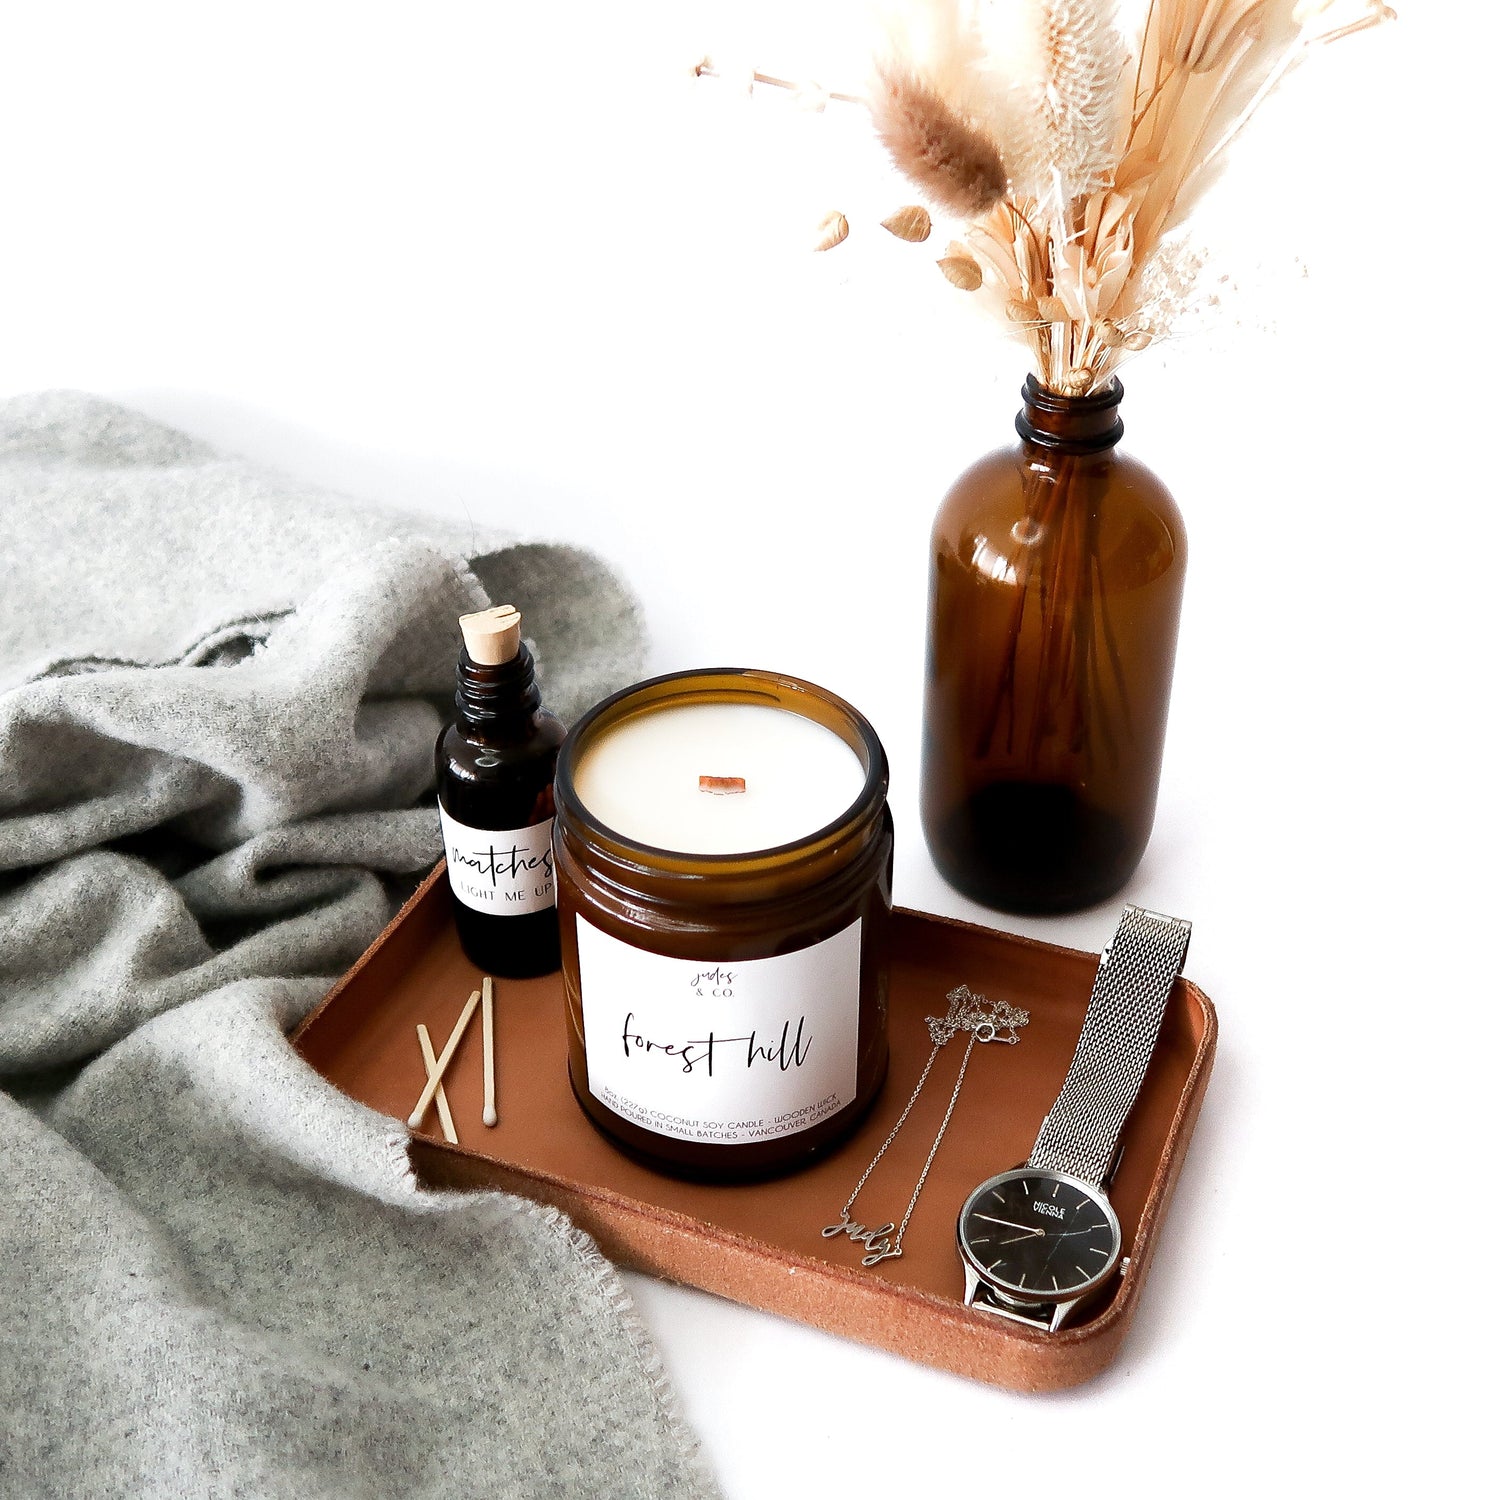 Eco-friendly coconut soy candles with crackling wooden wick in amber glass jar.